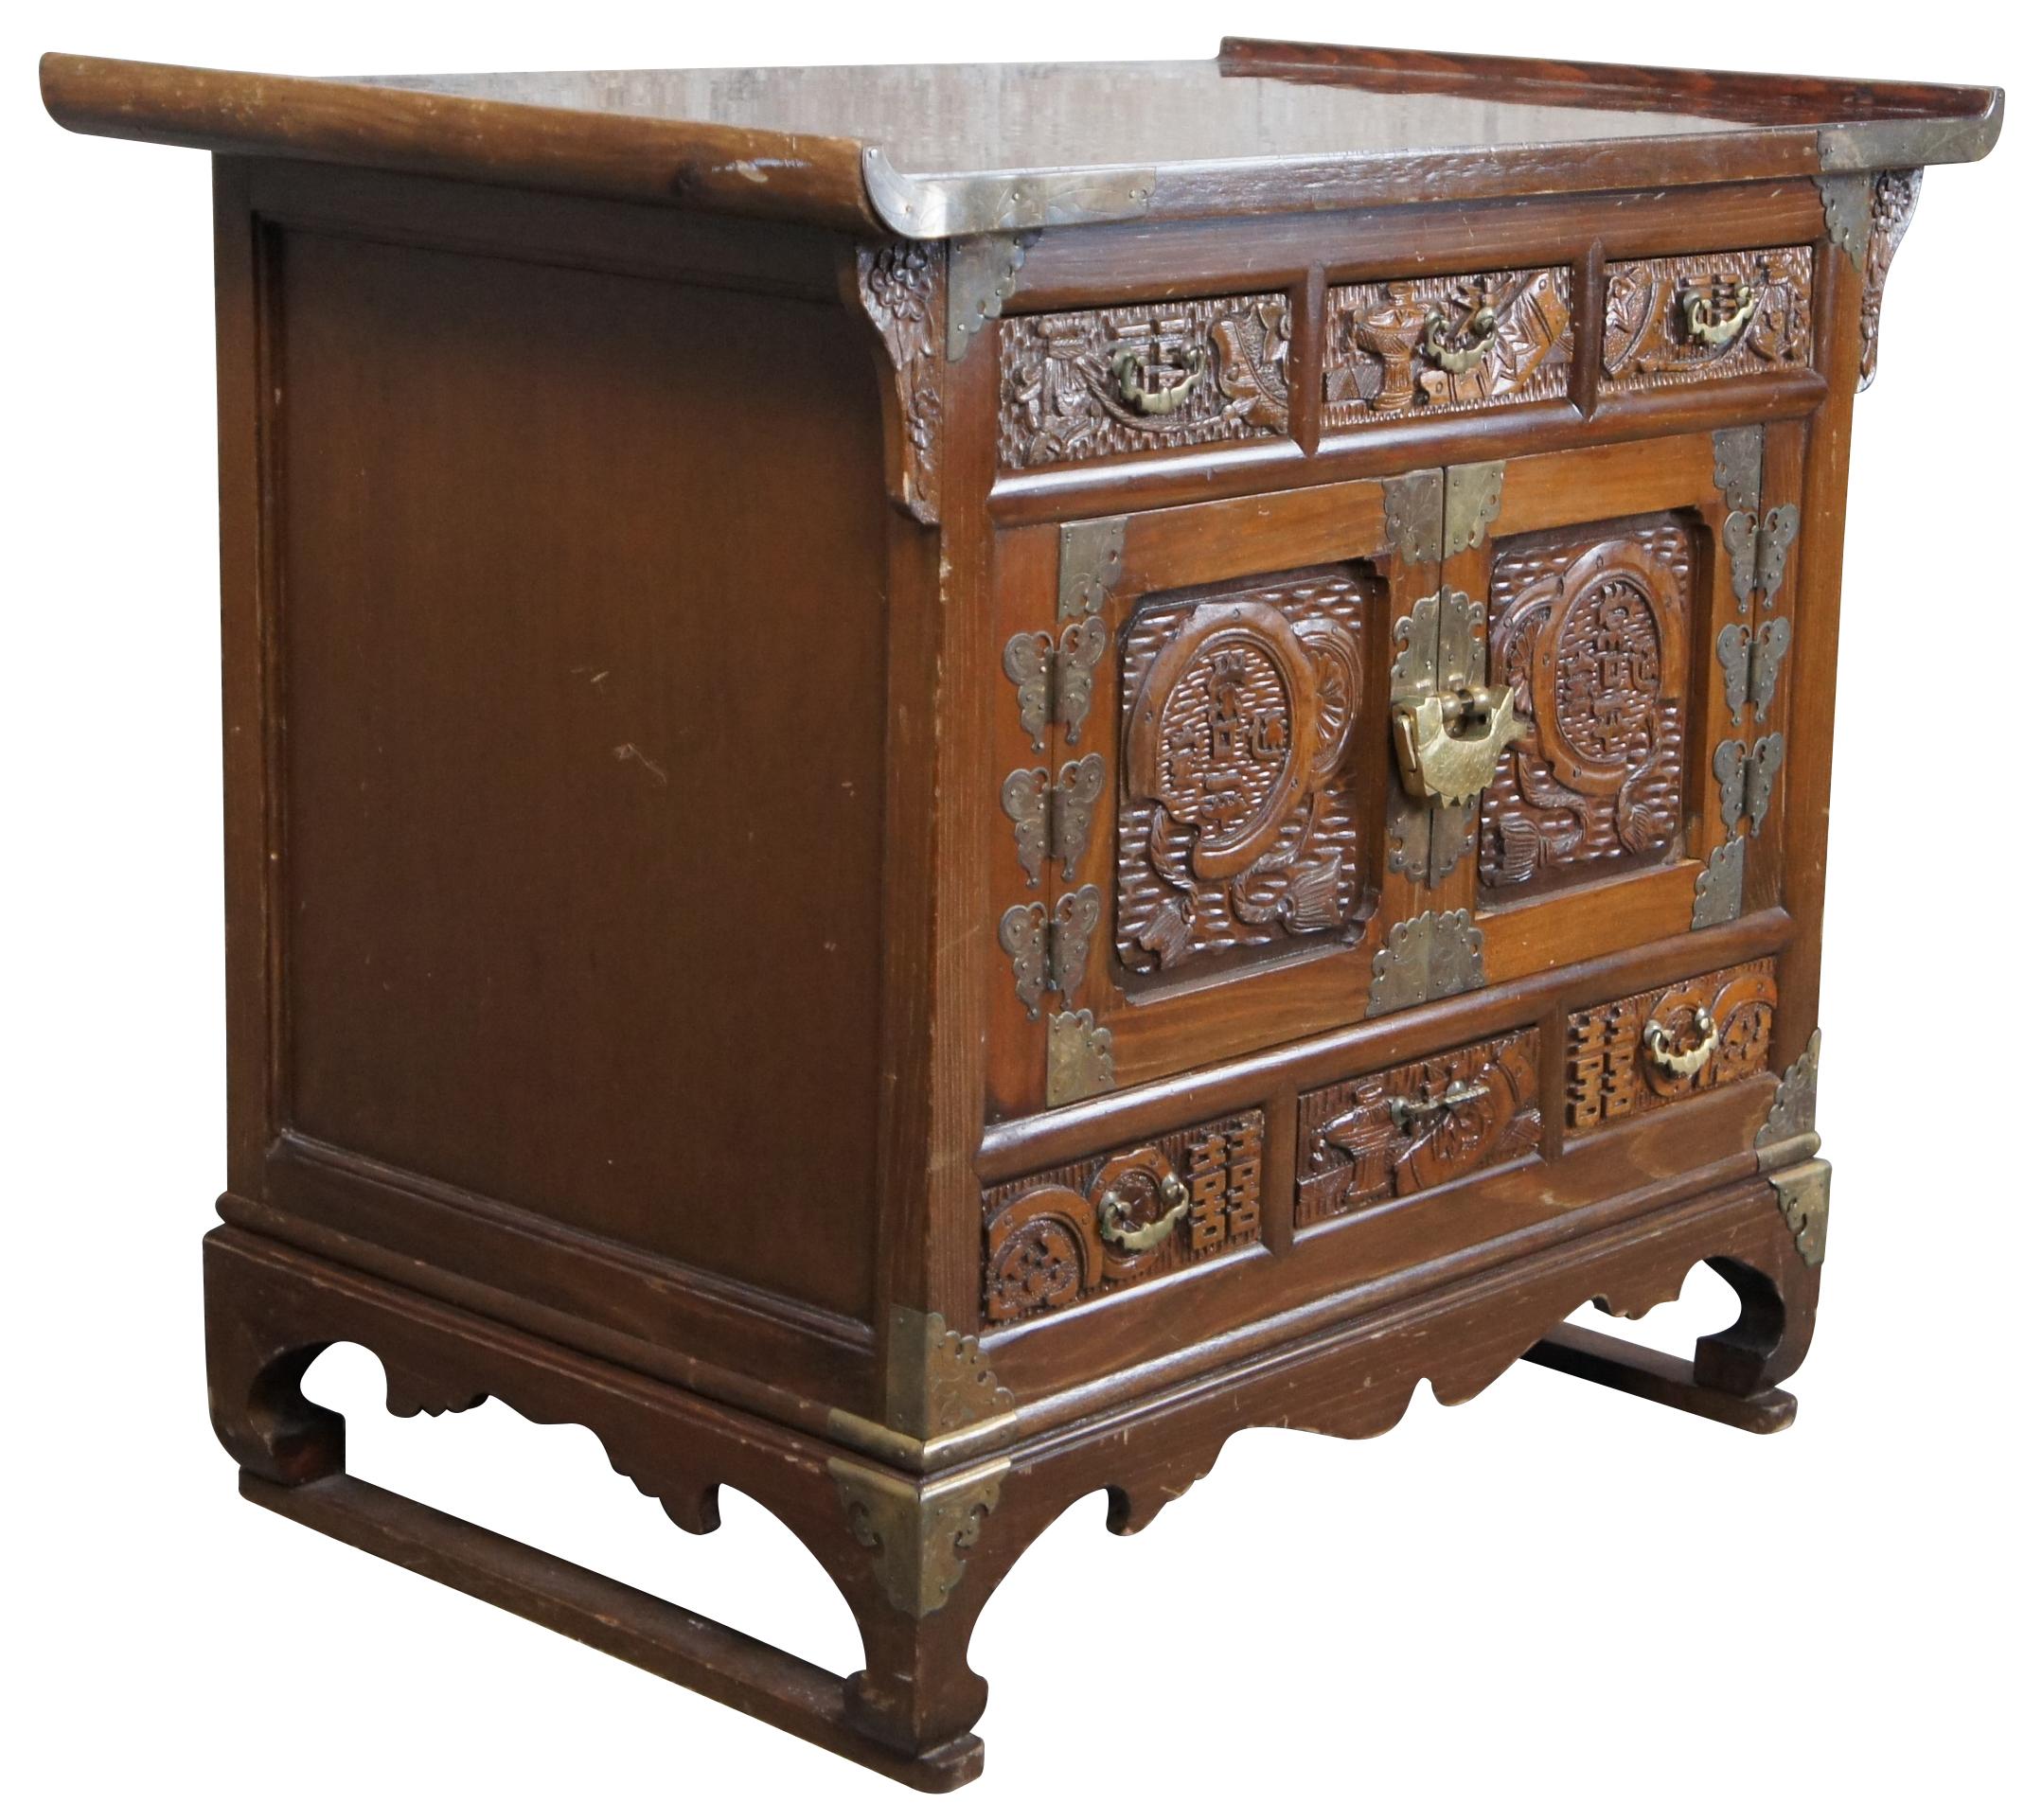 Antique Chinese Chinoiserie Tansu chest, nightstand or side table.  Made of pine with a rosewood top featuring traditional form with six high relief carved drawers that feature brass hardware, flanked by central cabinet, and flared surface with